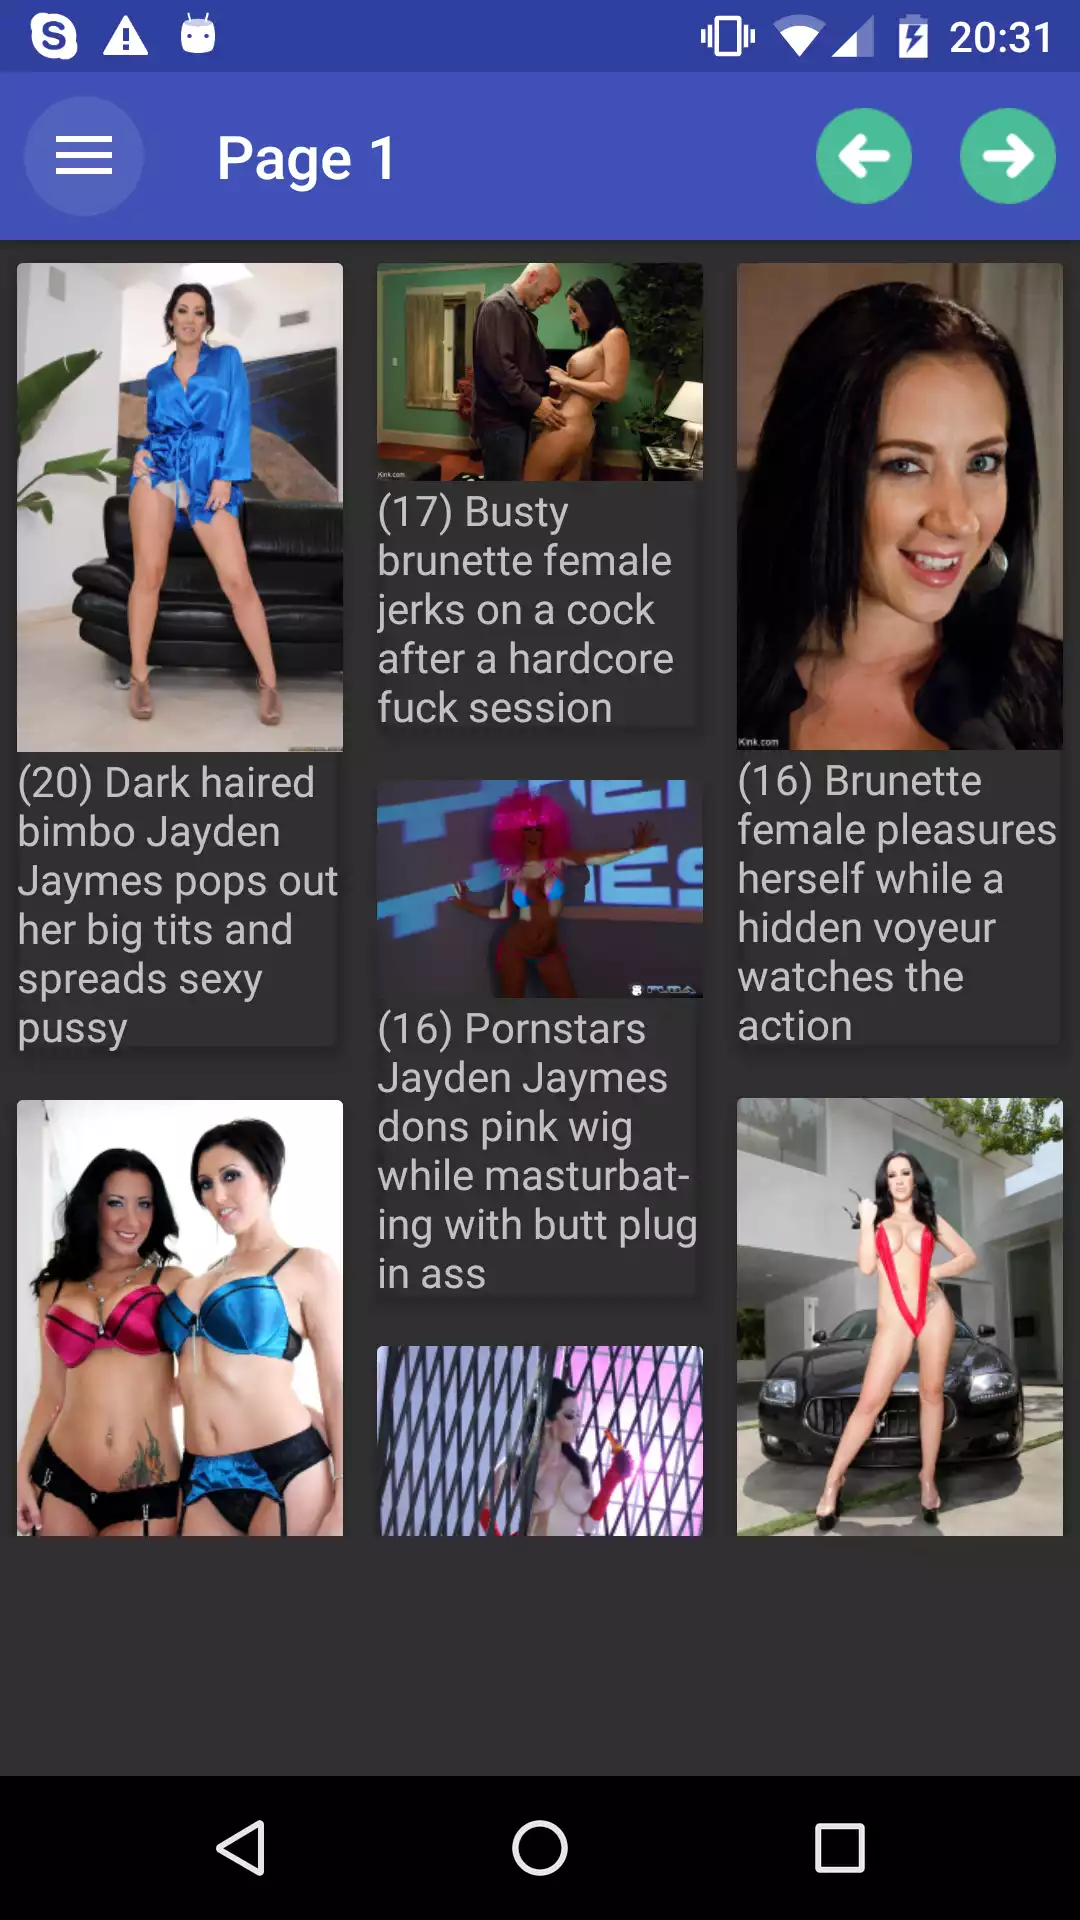 Jayden Jaymes anime,game,pornstar,hantai,download,adult,hentai,sexy,hot,pictures,app,hentaipics,galleries,free,best,apk,application,porn,wallpapers,android,pornstars,andriod,apps